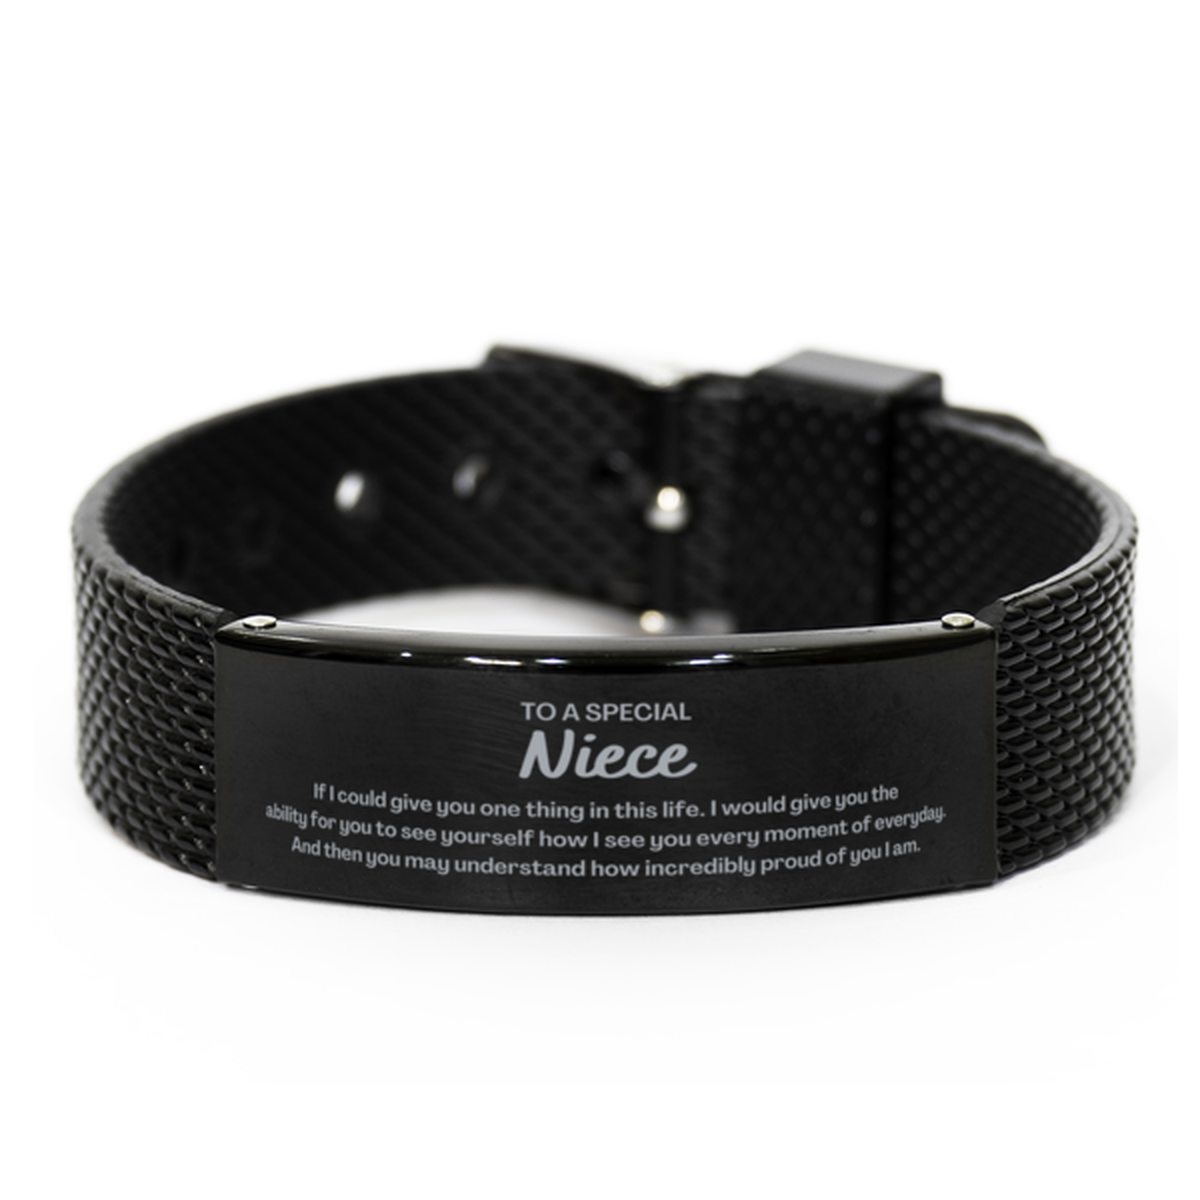 To My Niece Black Shark Mesh Bracelet, Gifts For Niece Engraved, Inspirational Gifts for Christmas Birthday, Epic Gifts for Niece To A Special Niece how incredibly proud of you I am